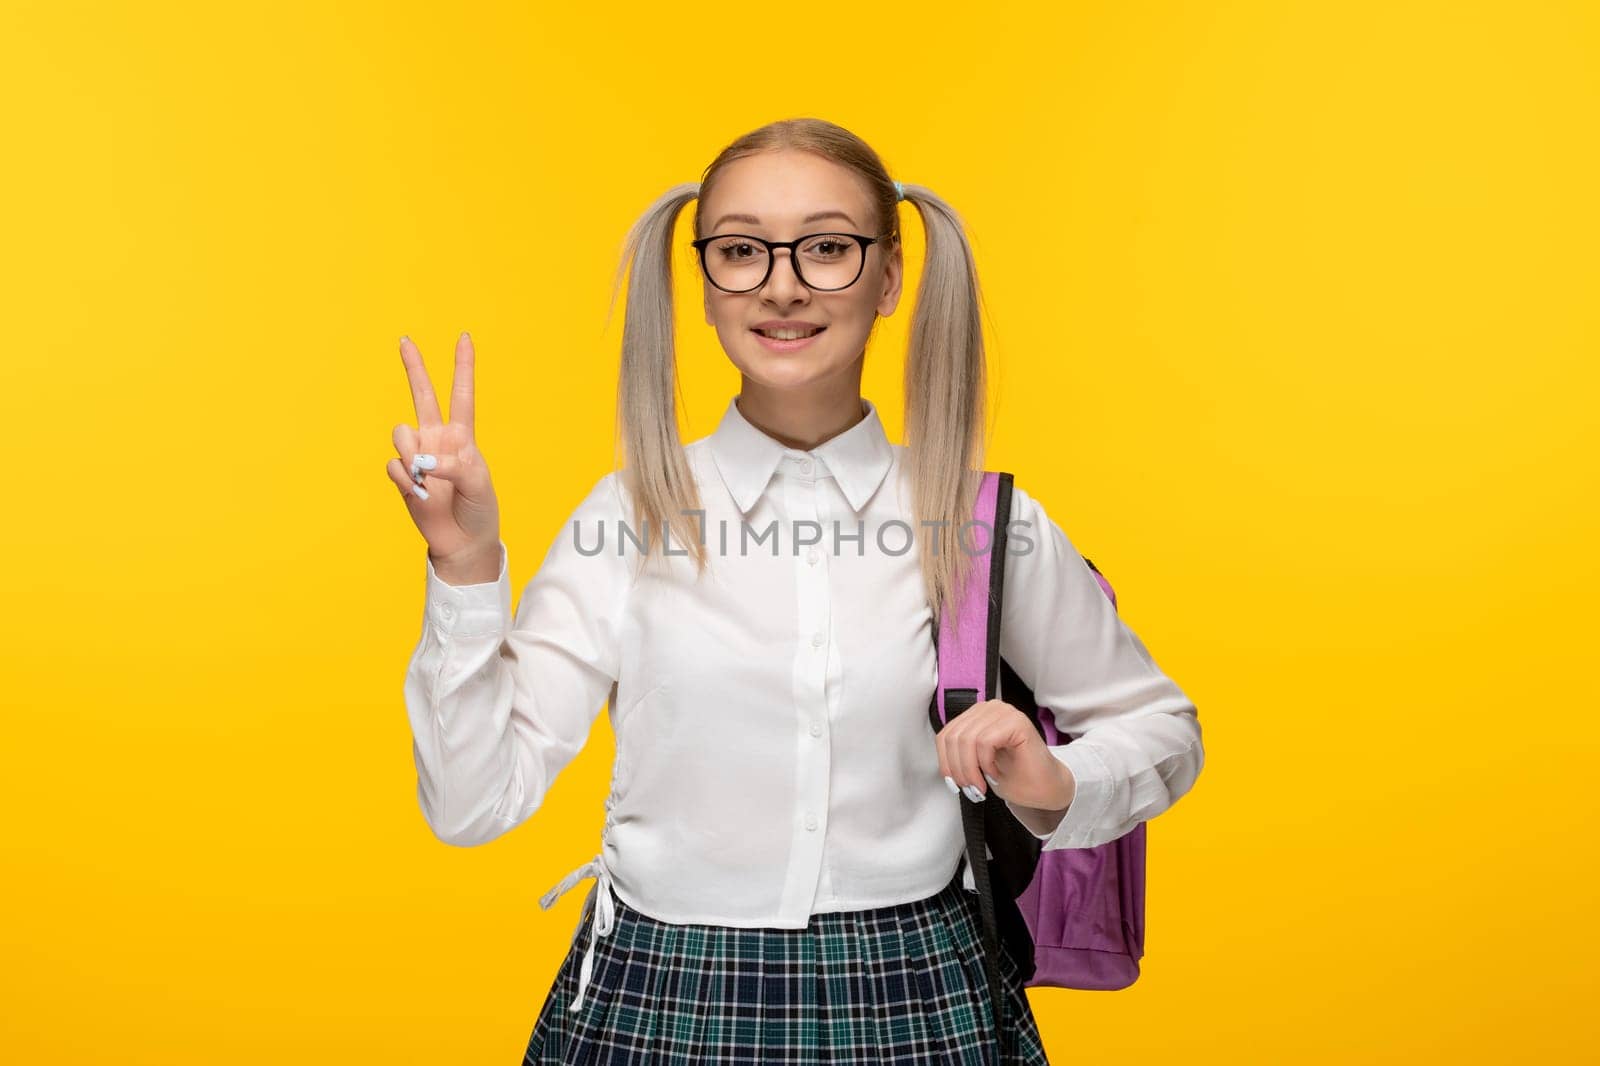 world book day blonde school girl showing peace gesture smiling with backpack by Kamran